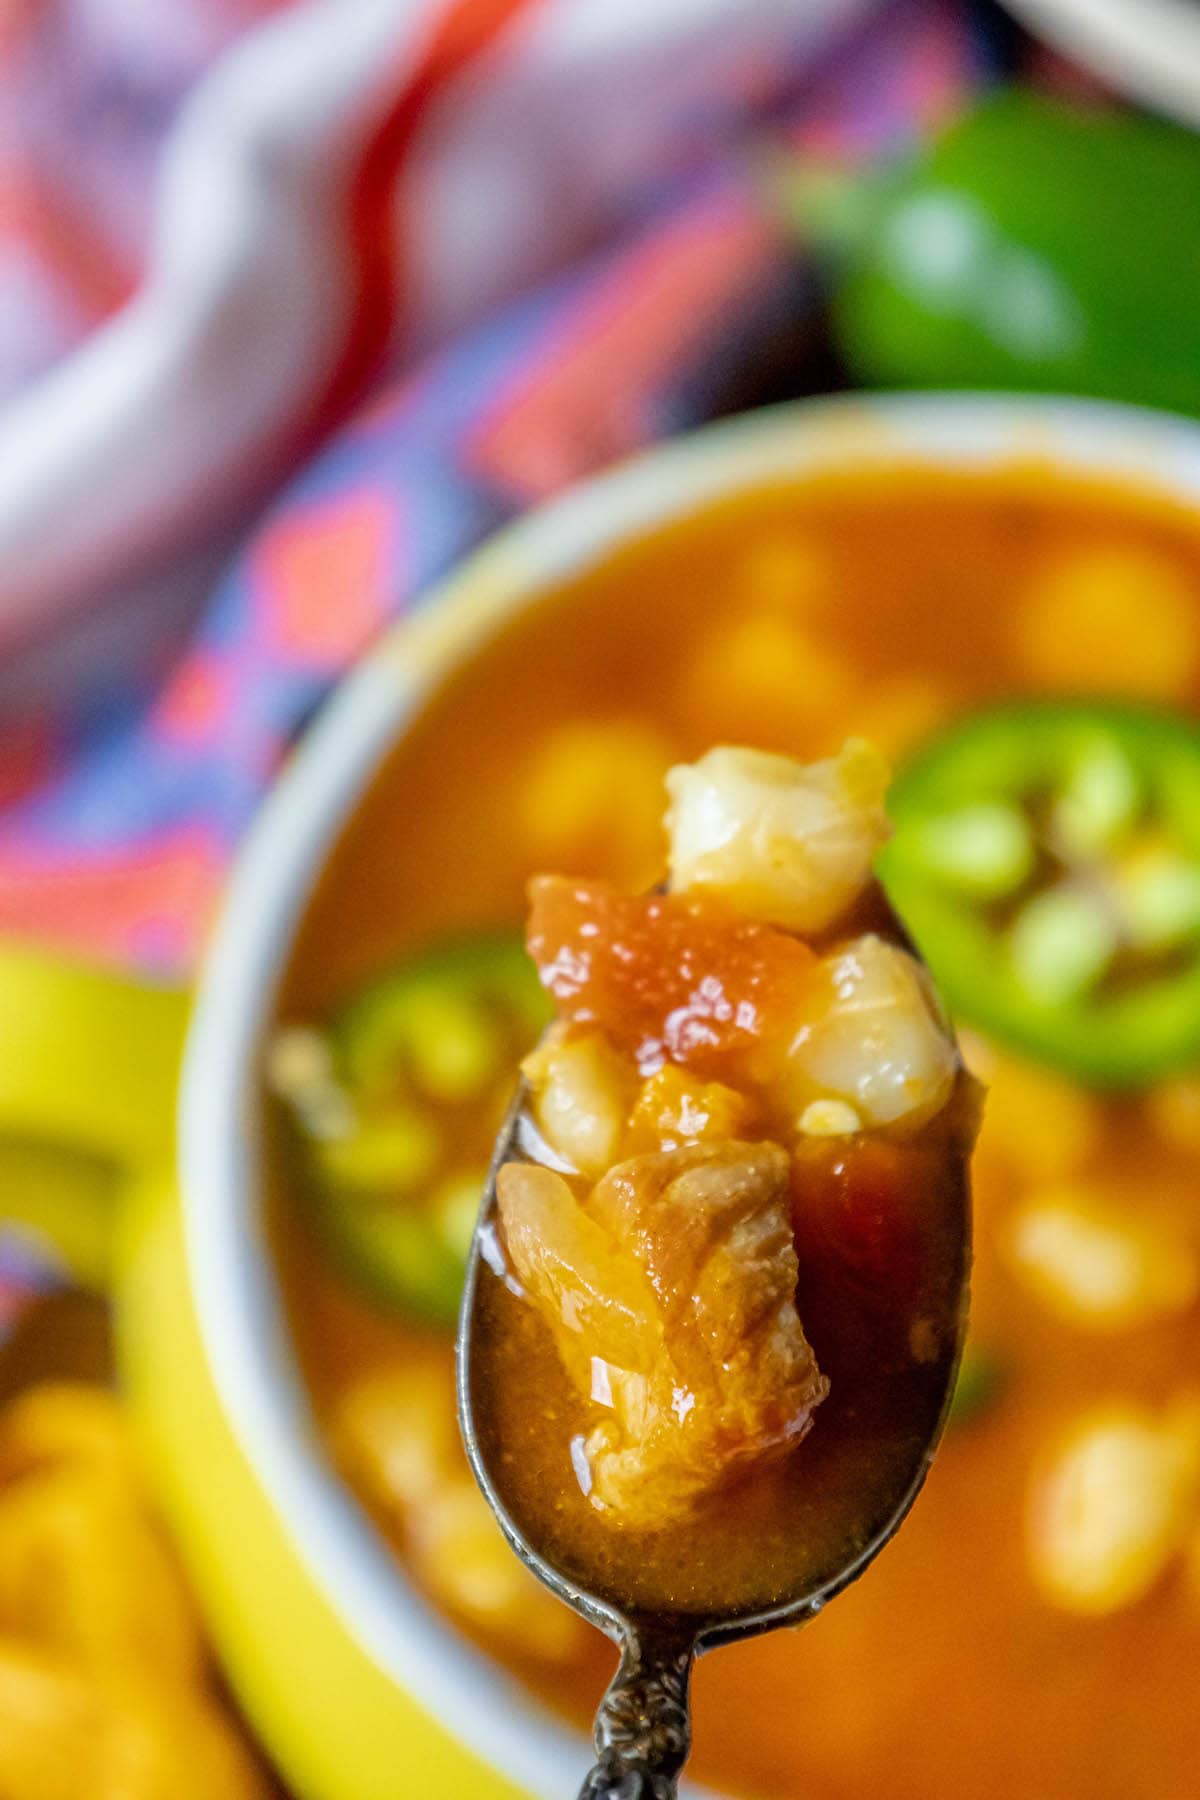 Red posole made with pork shoulder, hominy, and a blend of spices topped with jalapenos in a bowl